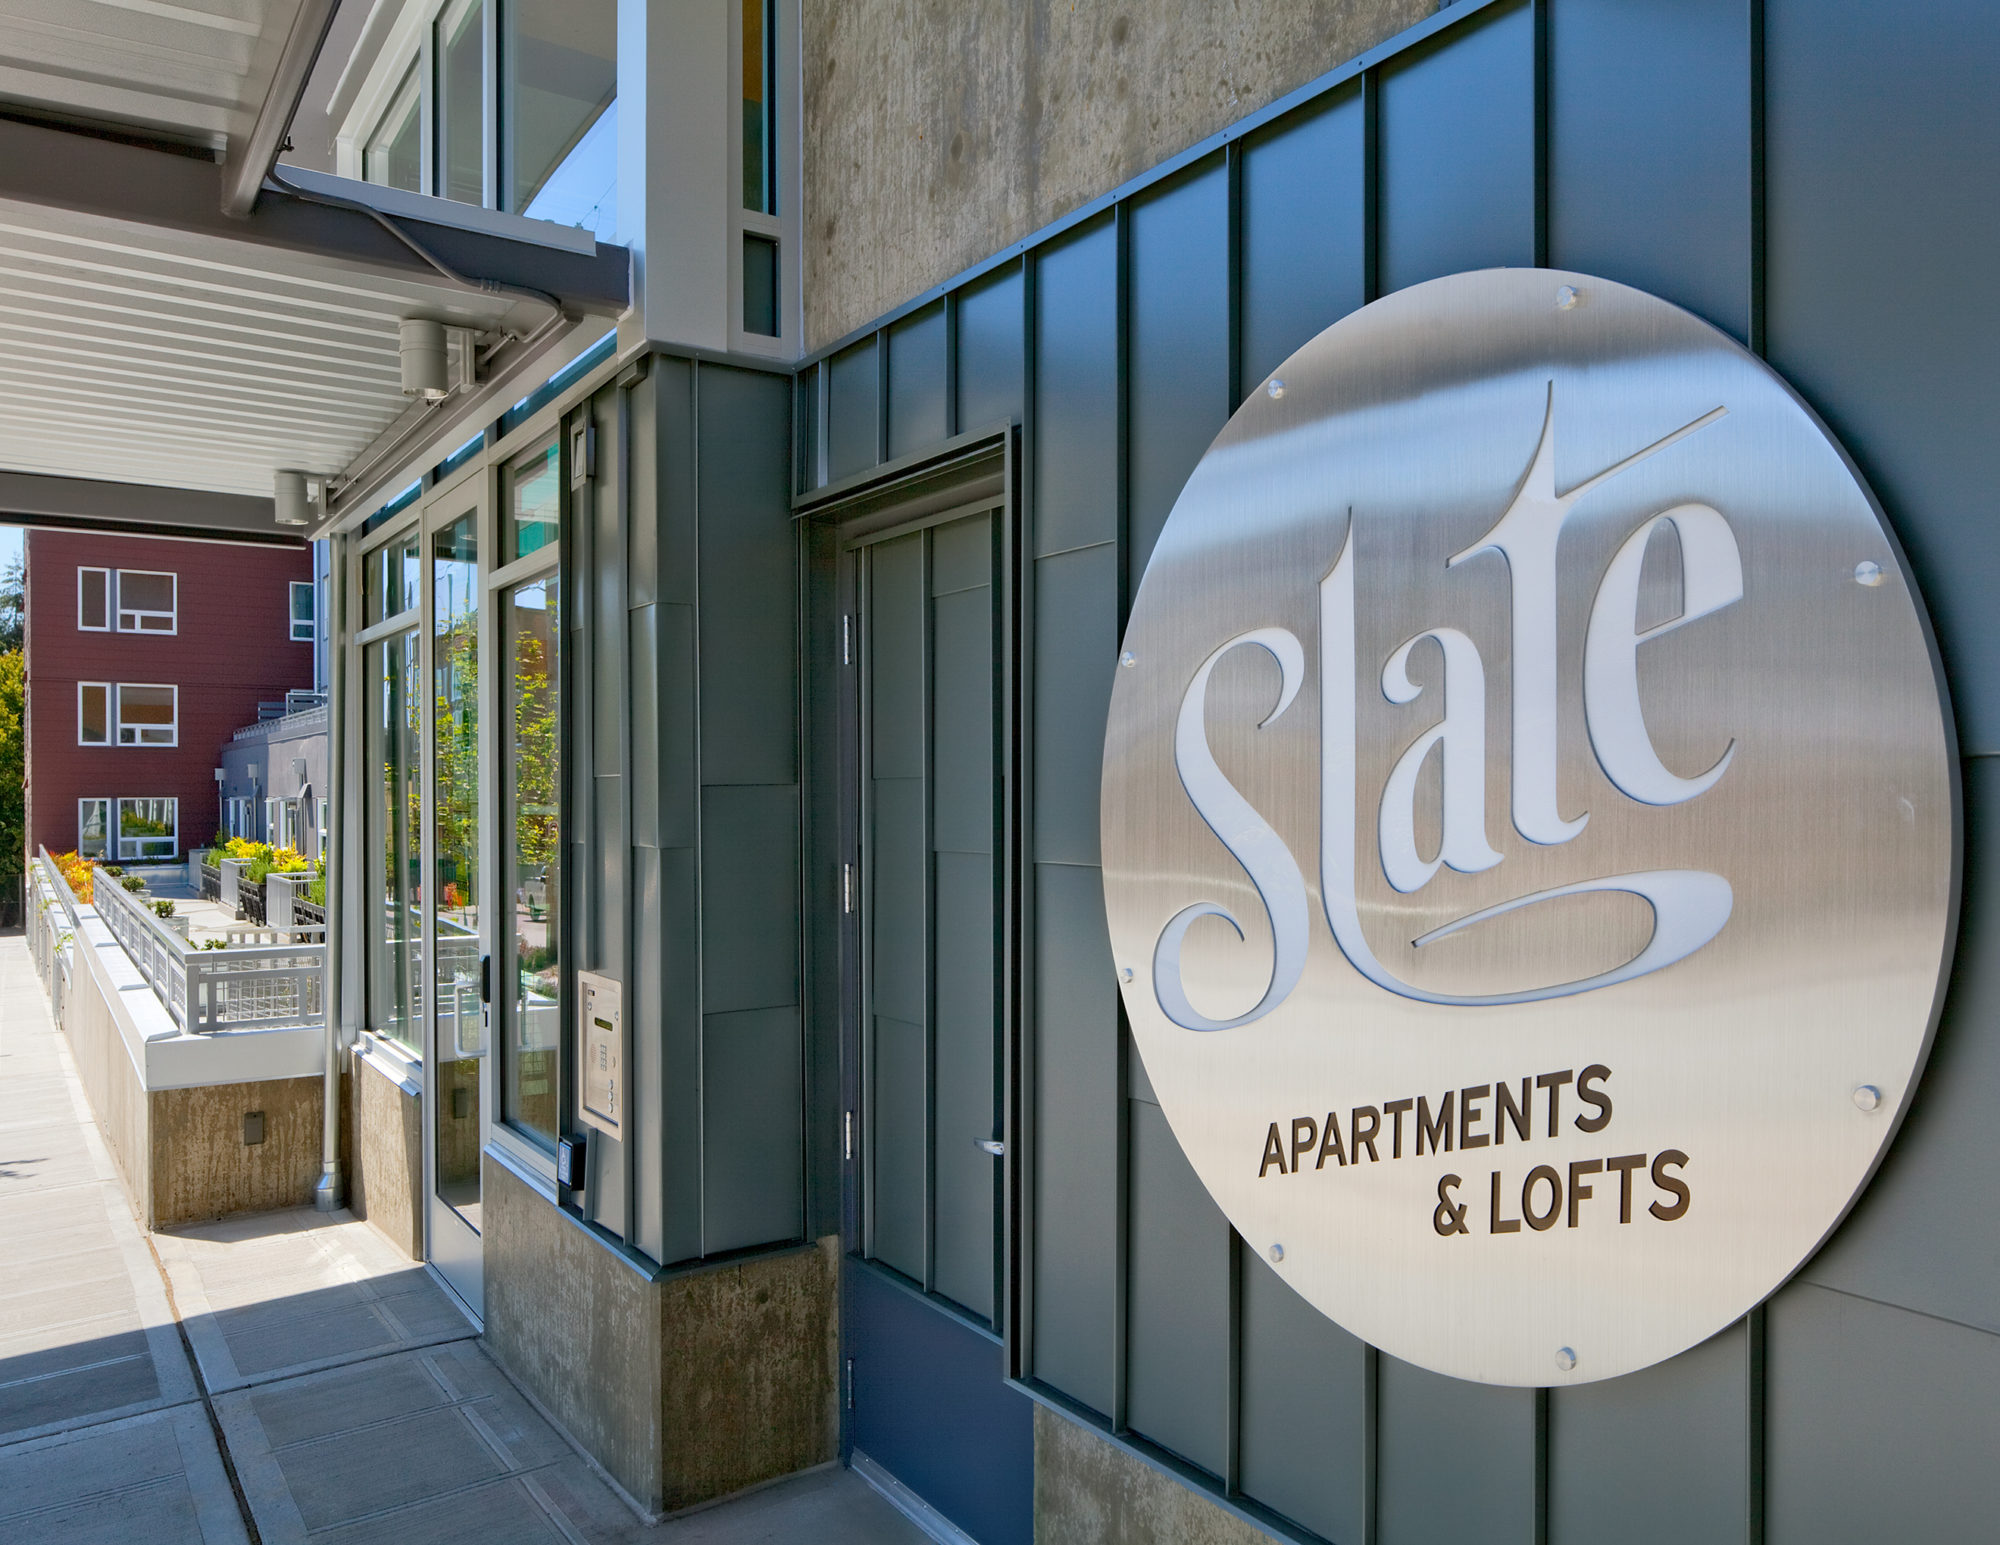 Circular metal sign with the words "Slate Apartments & Lofts" engraved upon it.